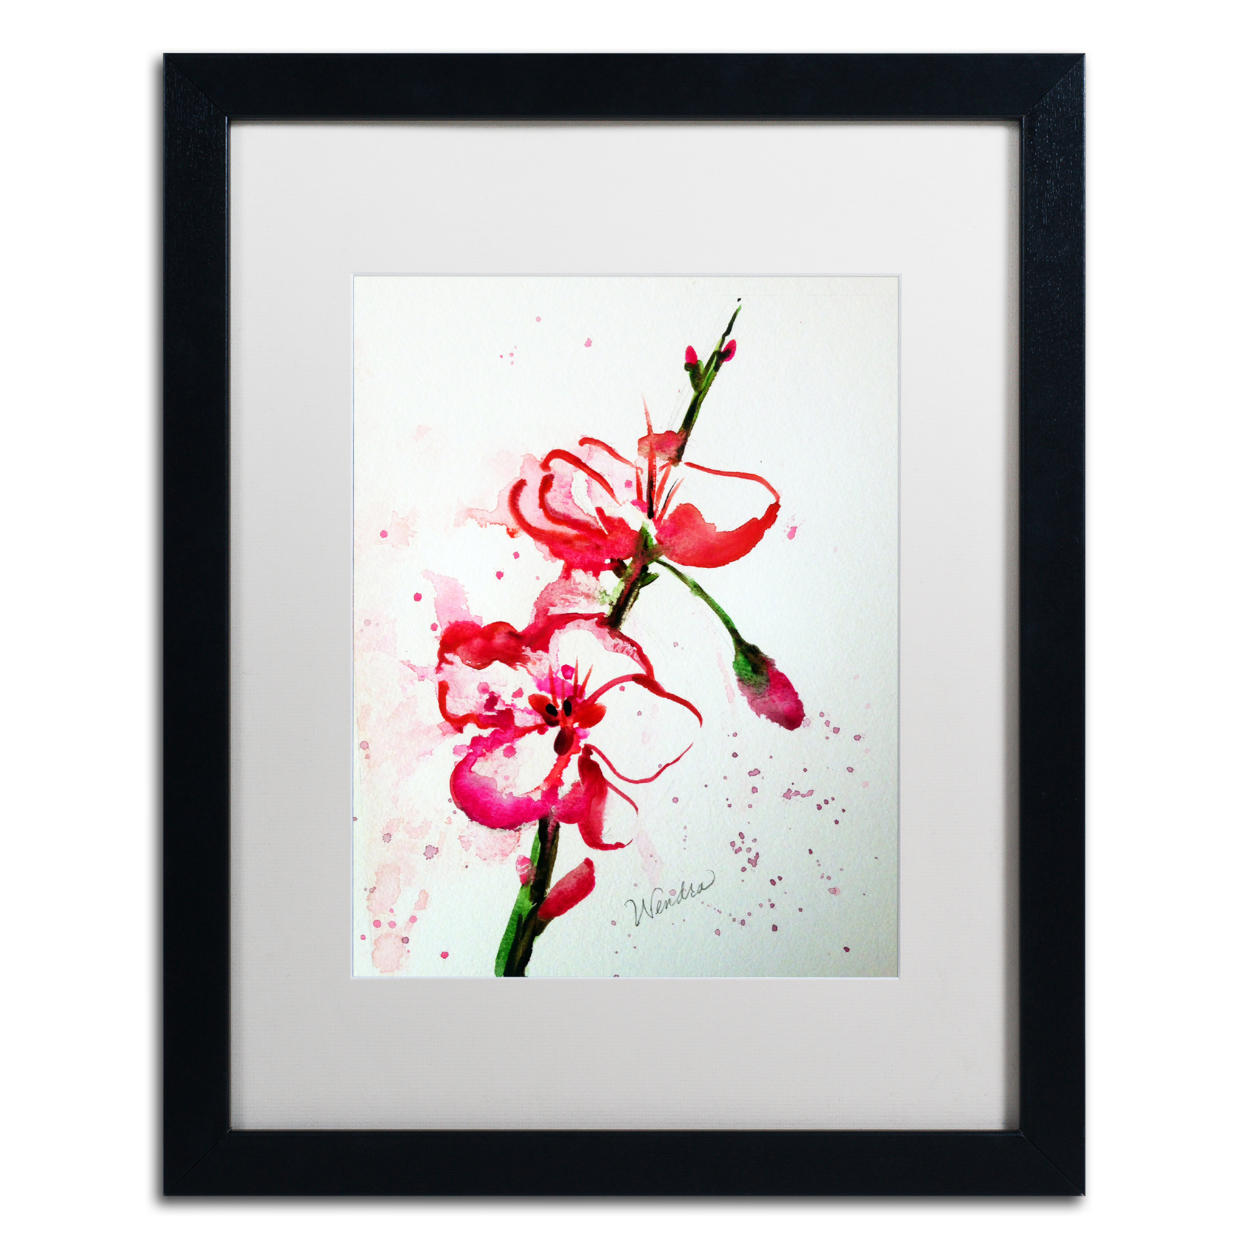 Wendra 'Spring Bloom Copy' Black Wooden Framed Art 18 X 22 Inches